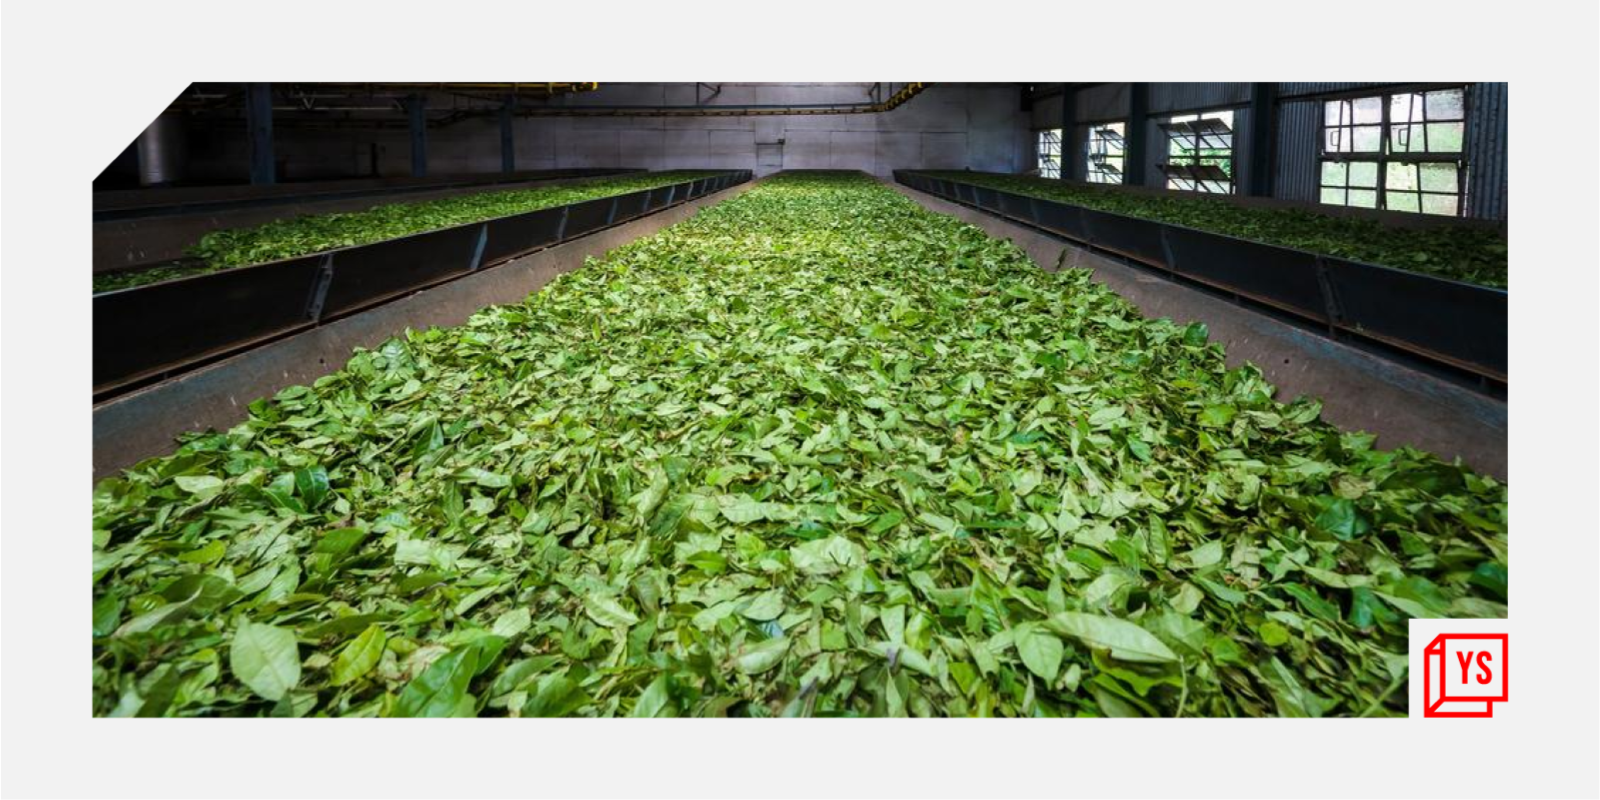 How technology is changing the tea business

